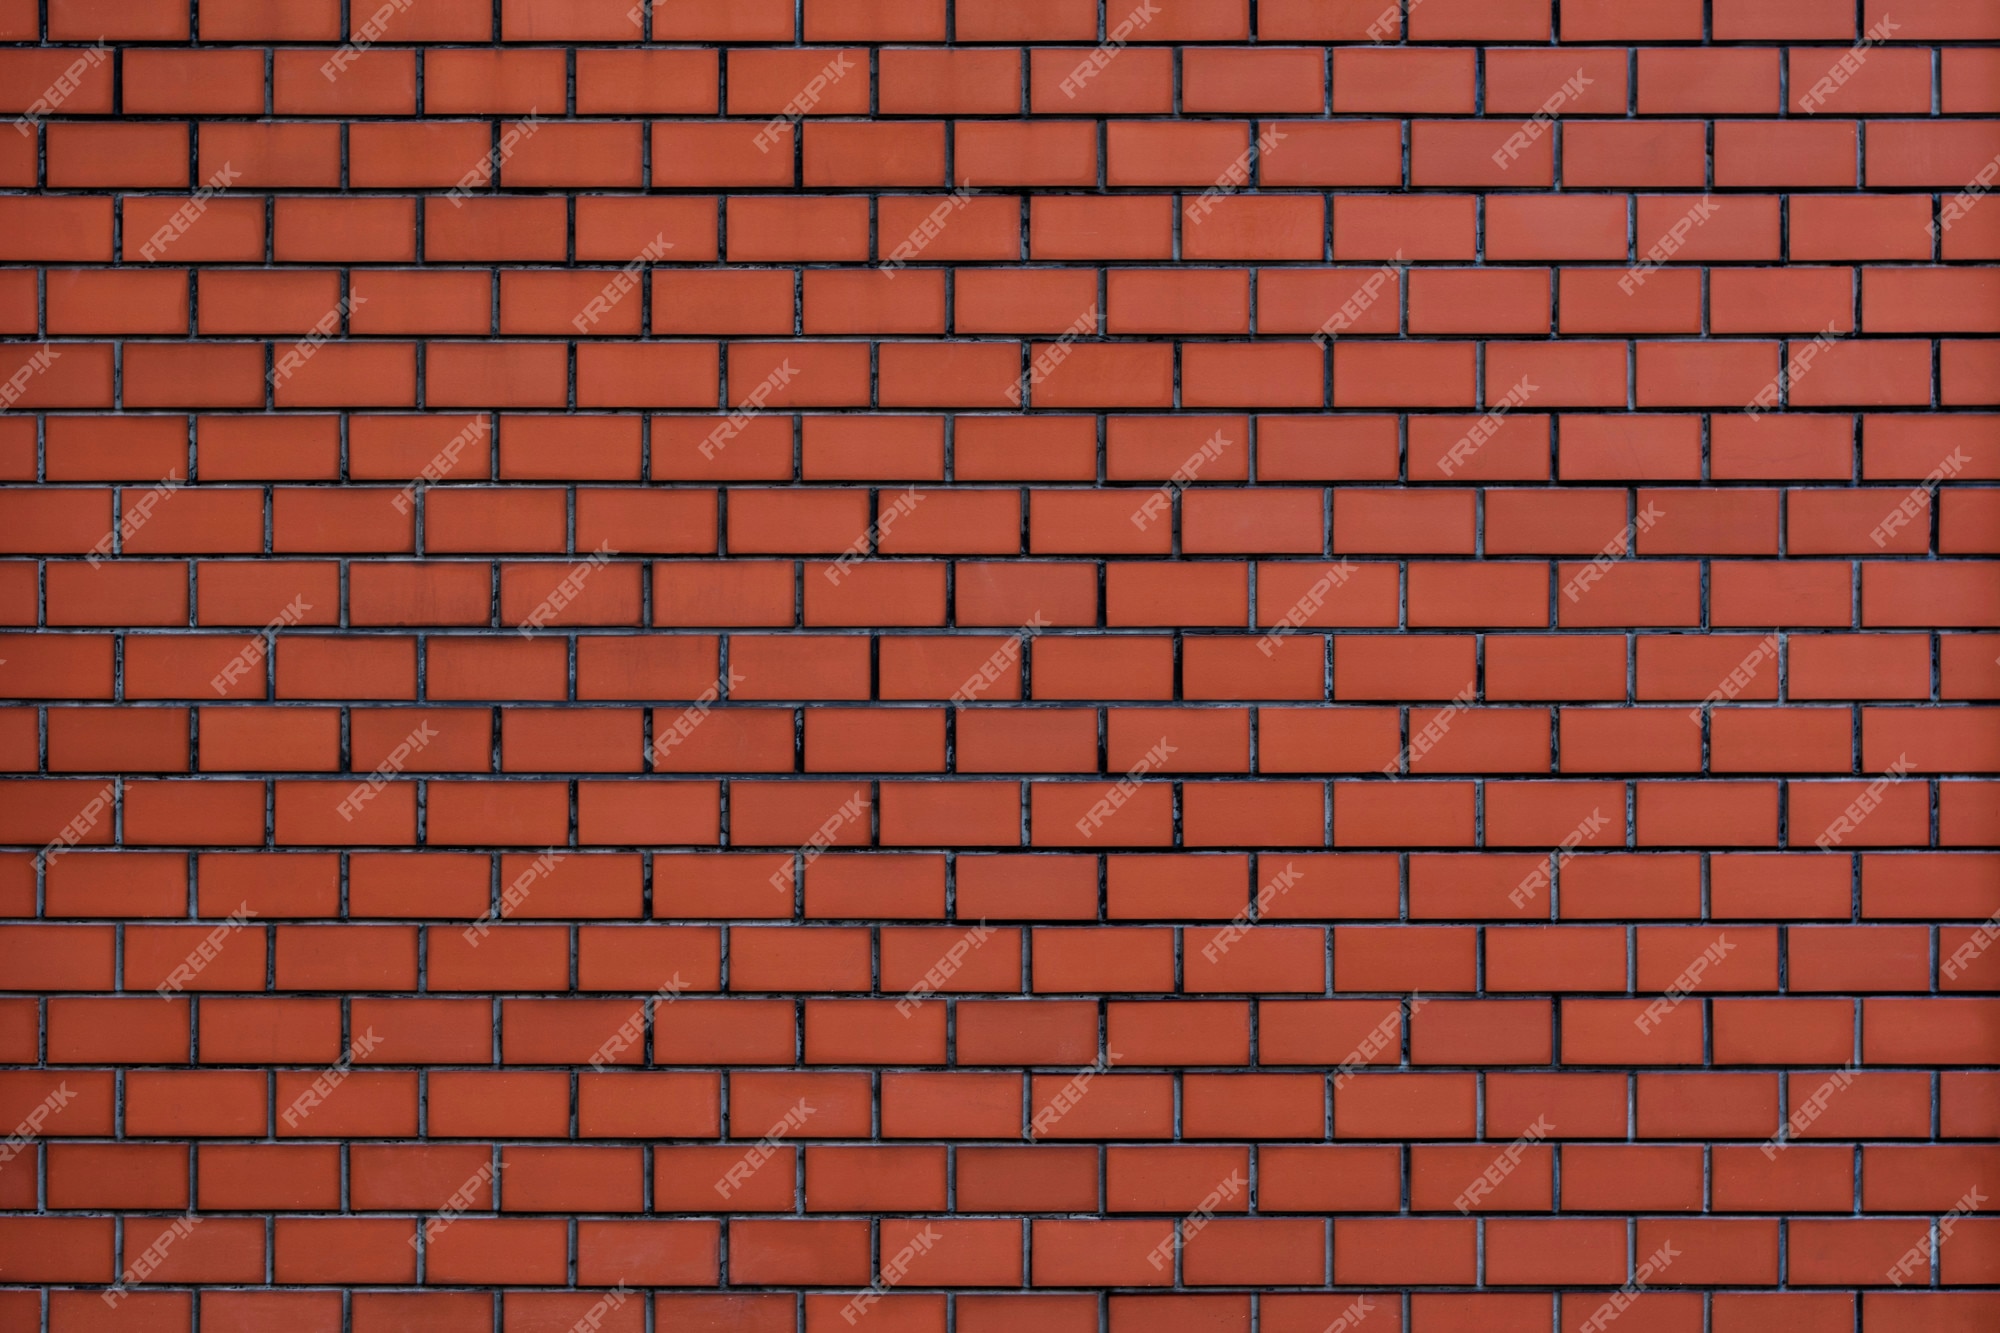 Red Brick Texture Images - Free Download